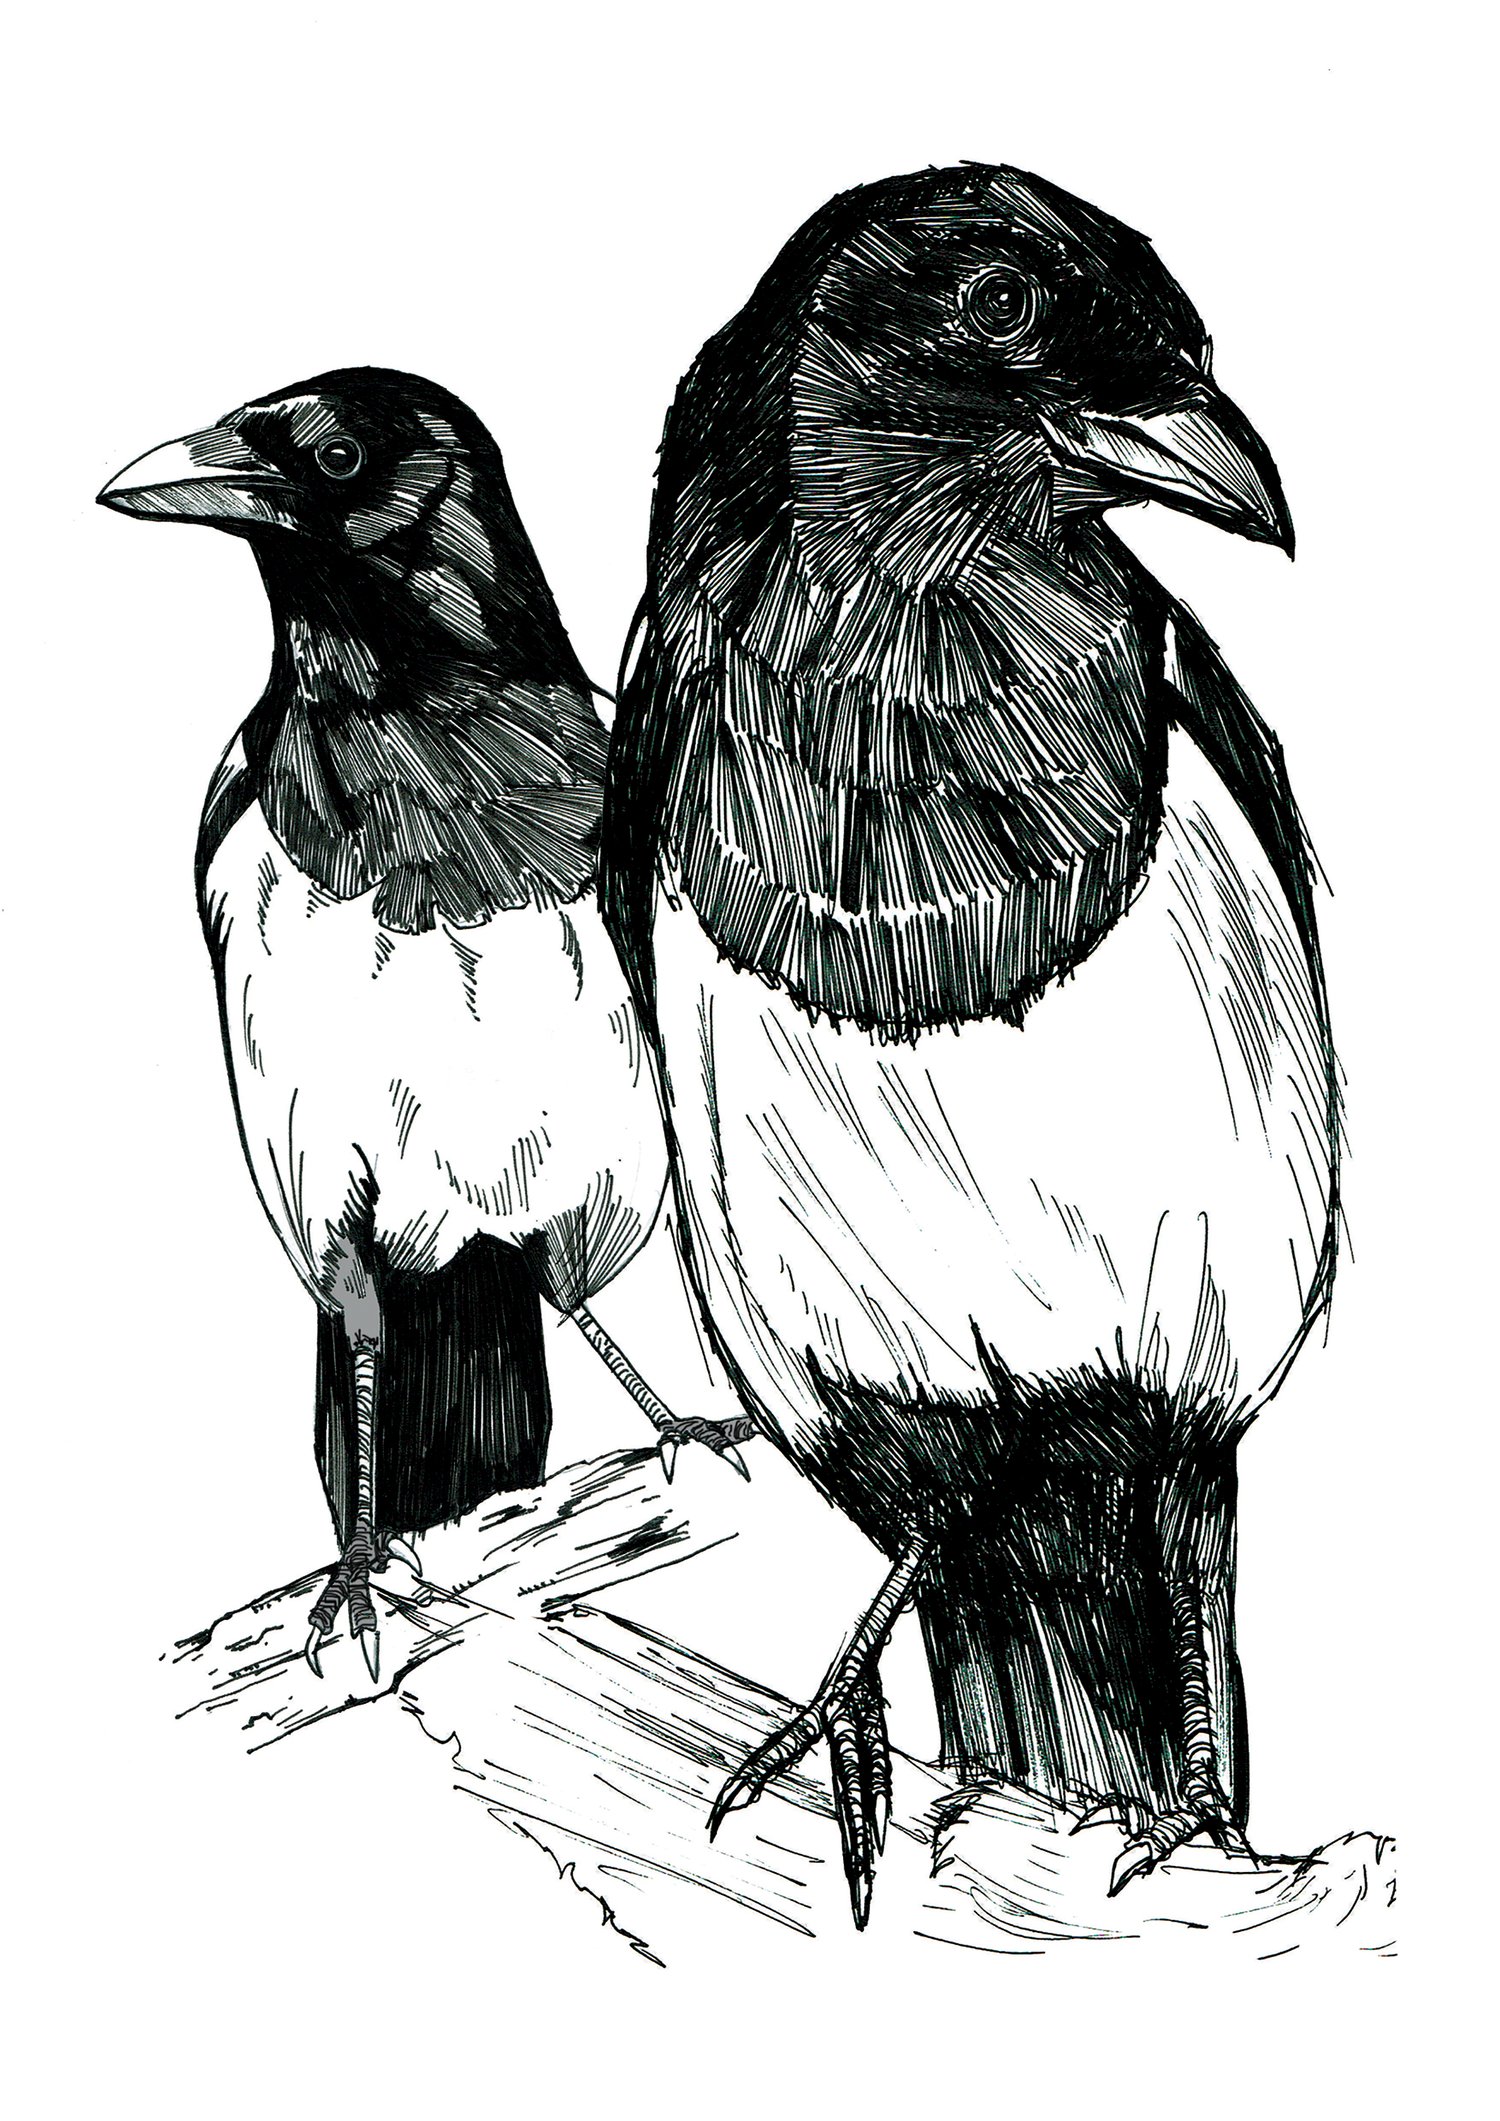 Image of Two Magpies Art Print Signed A4 Size (12" x 8")